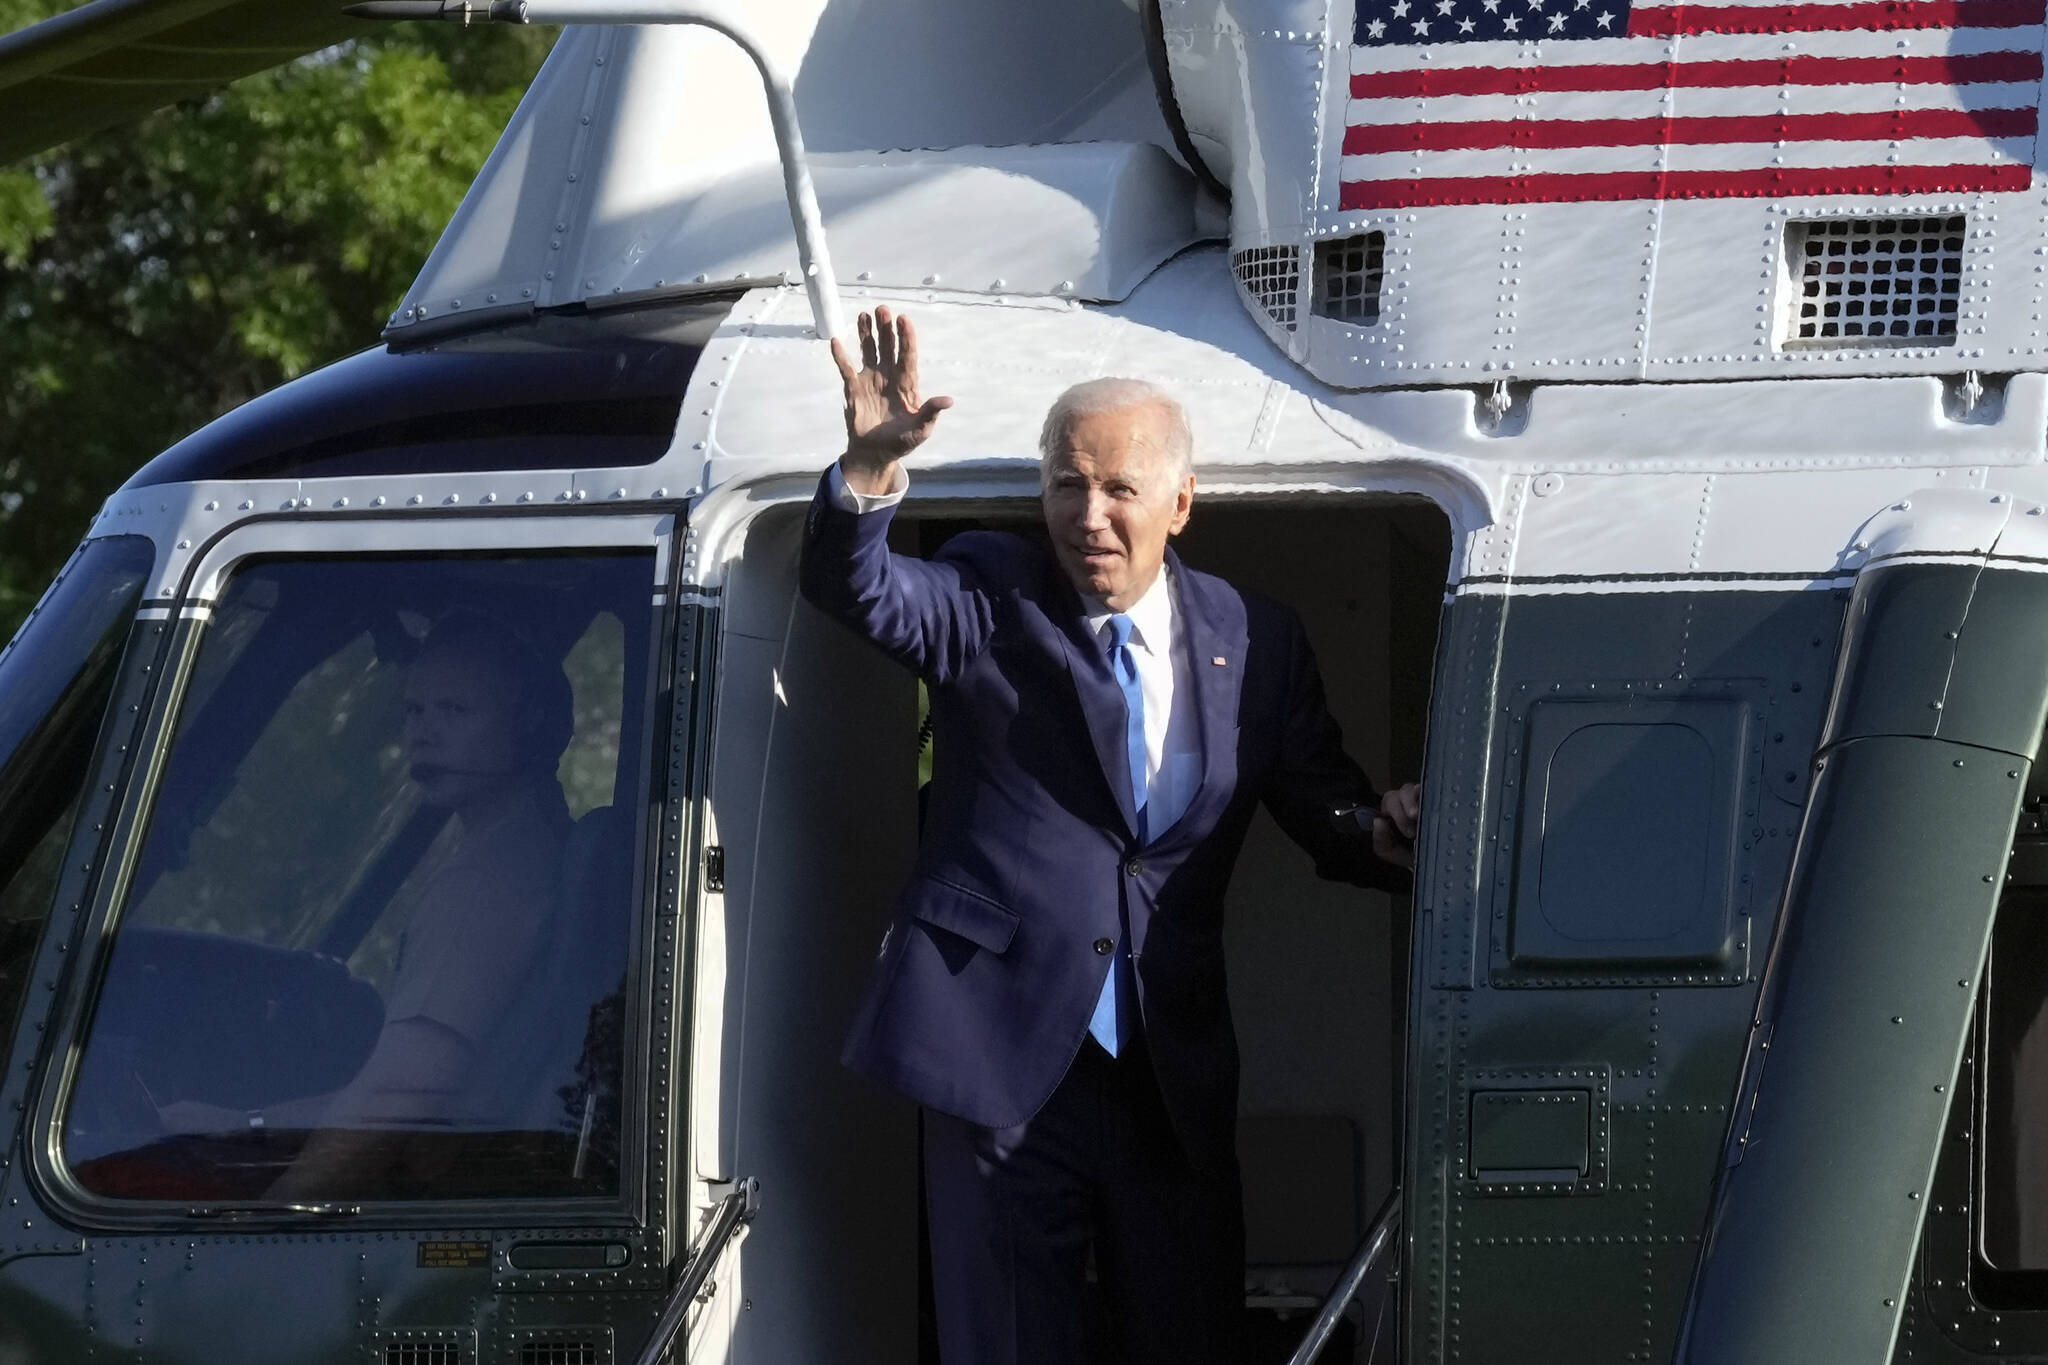 President Joe Biden waves as he boards Marine One on the South Lawn of the White House in Washington, Friday, May 26, 2023, as he heads to Camp David for the weekend. (AP Photo / Susan Walsh)